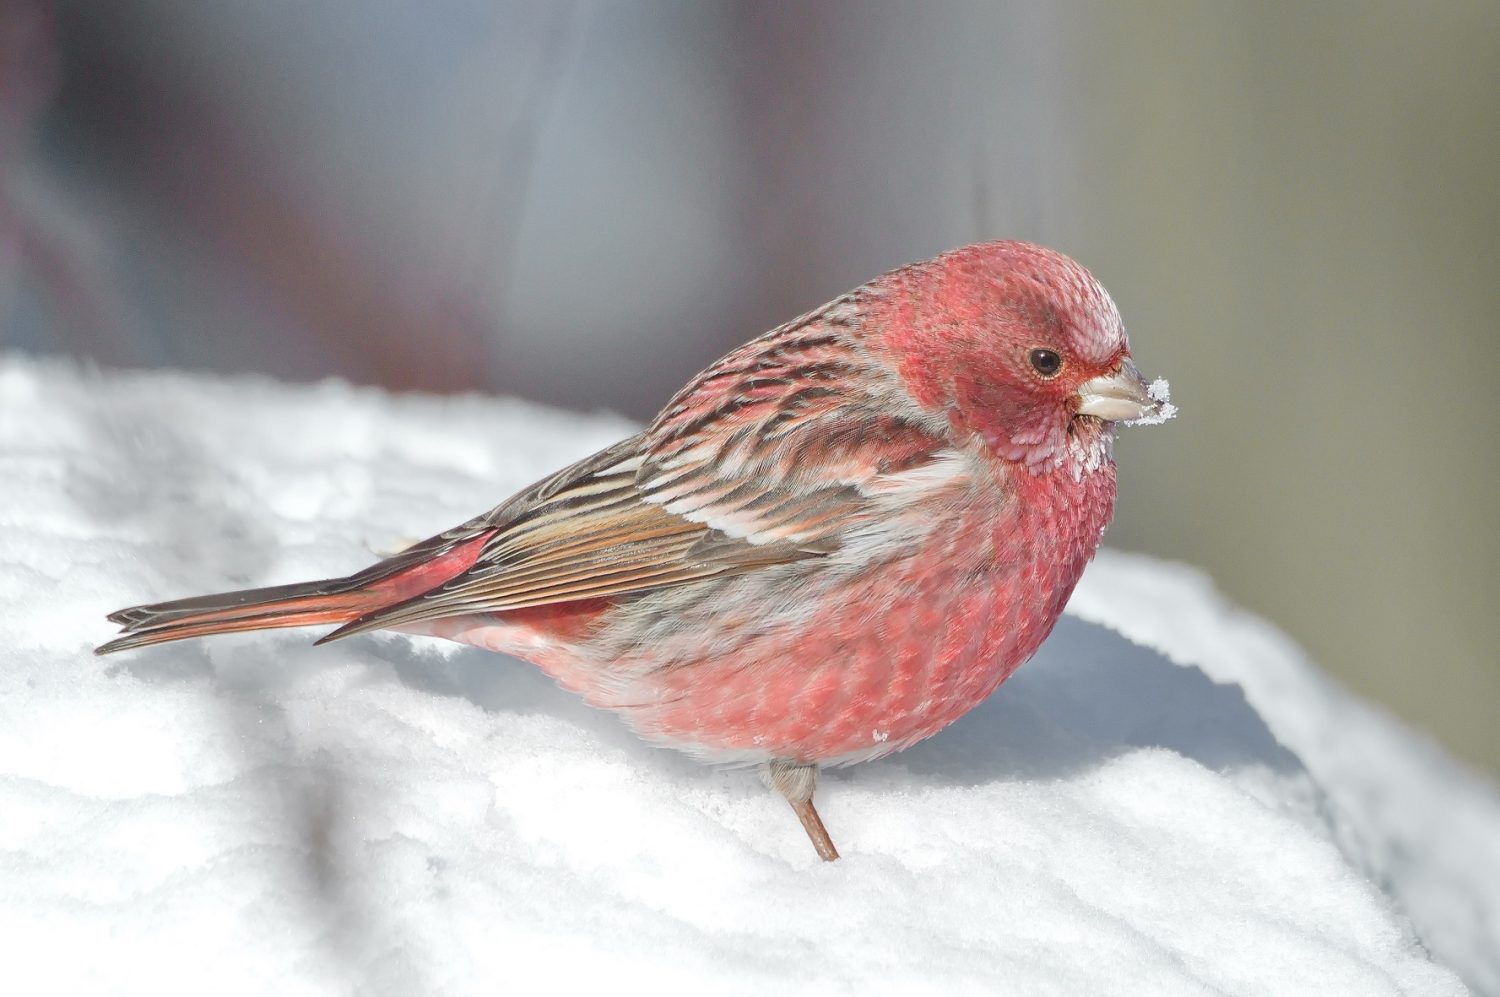 pink rosefinches catches the attention of the internet worldwide